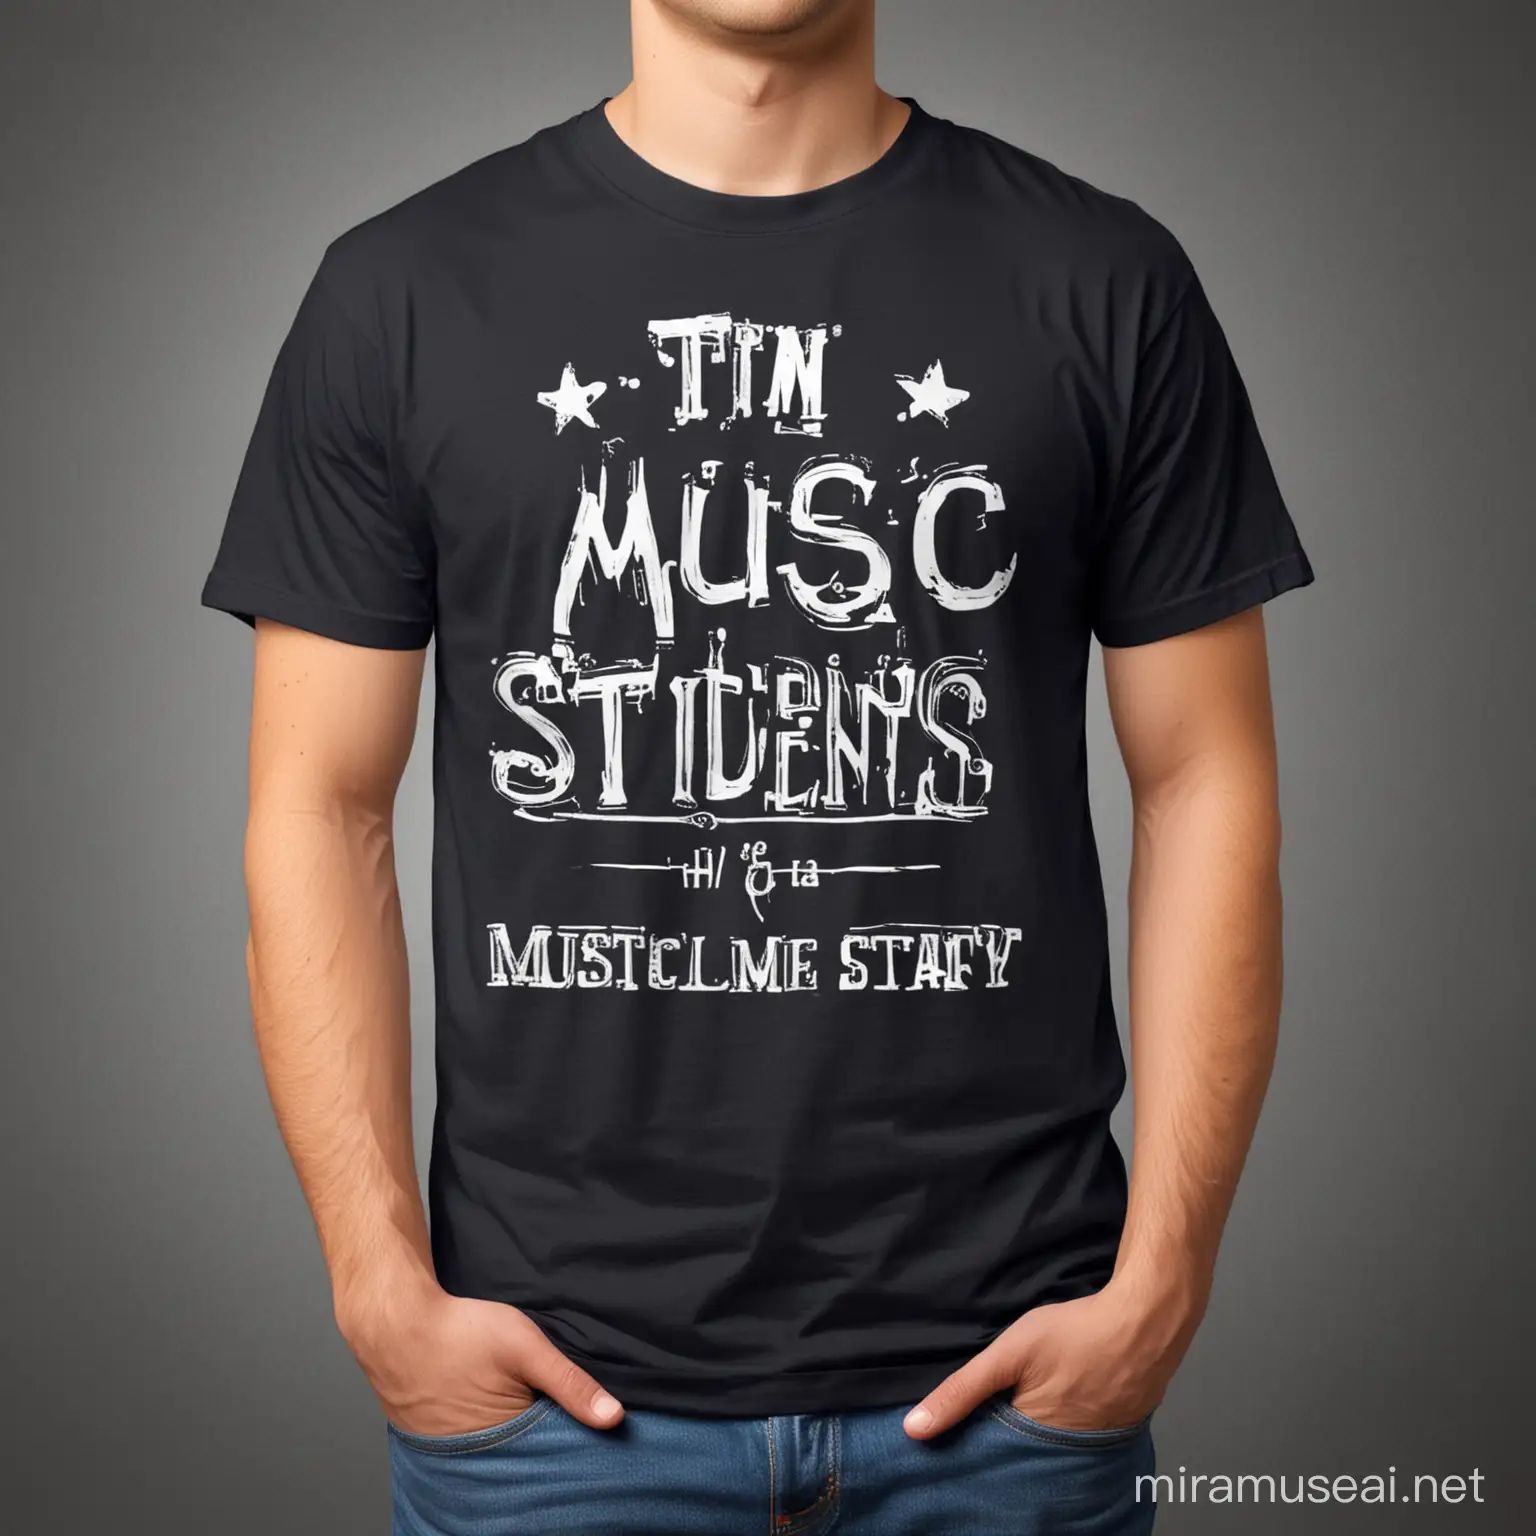 Music Student College TShirt Symbol of Passion and Identity